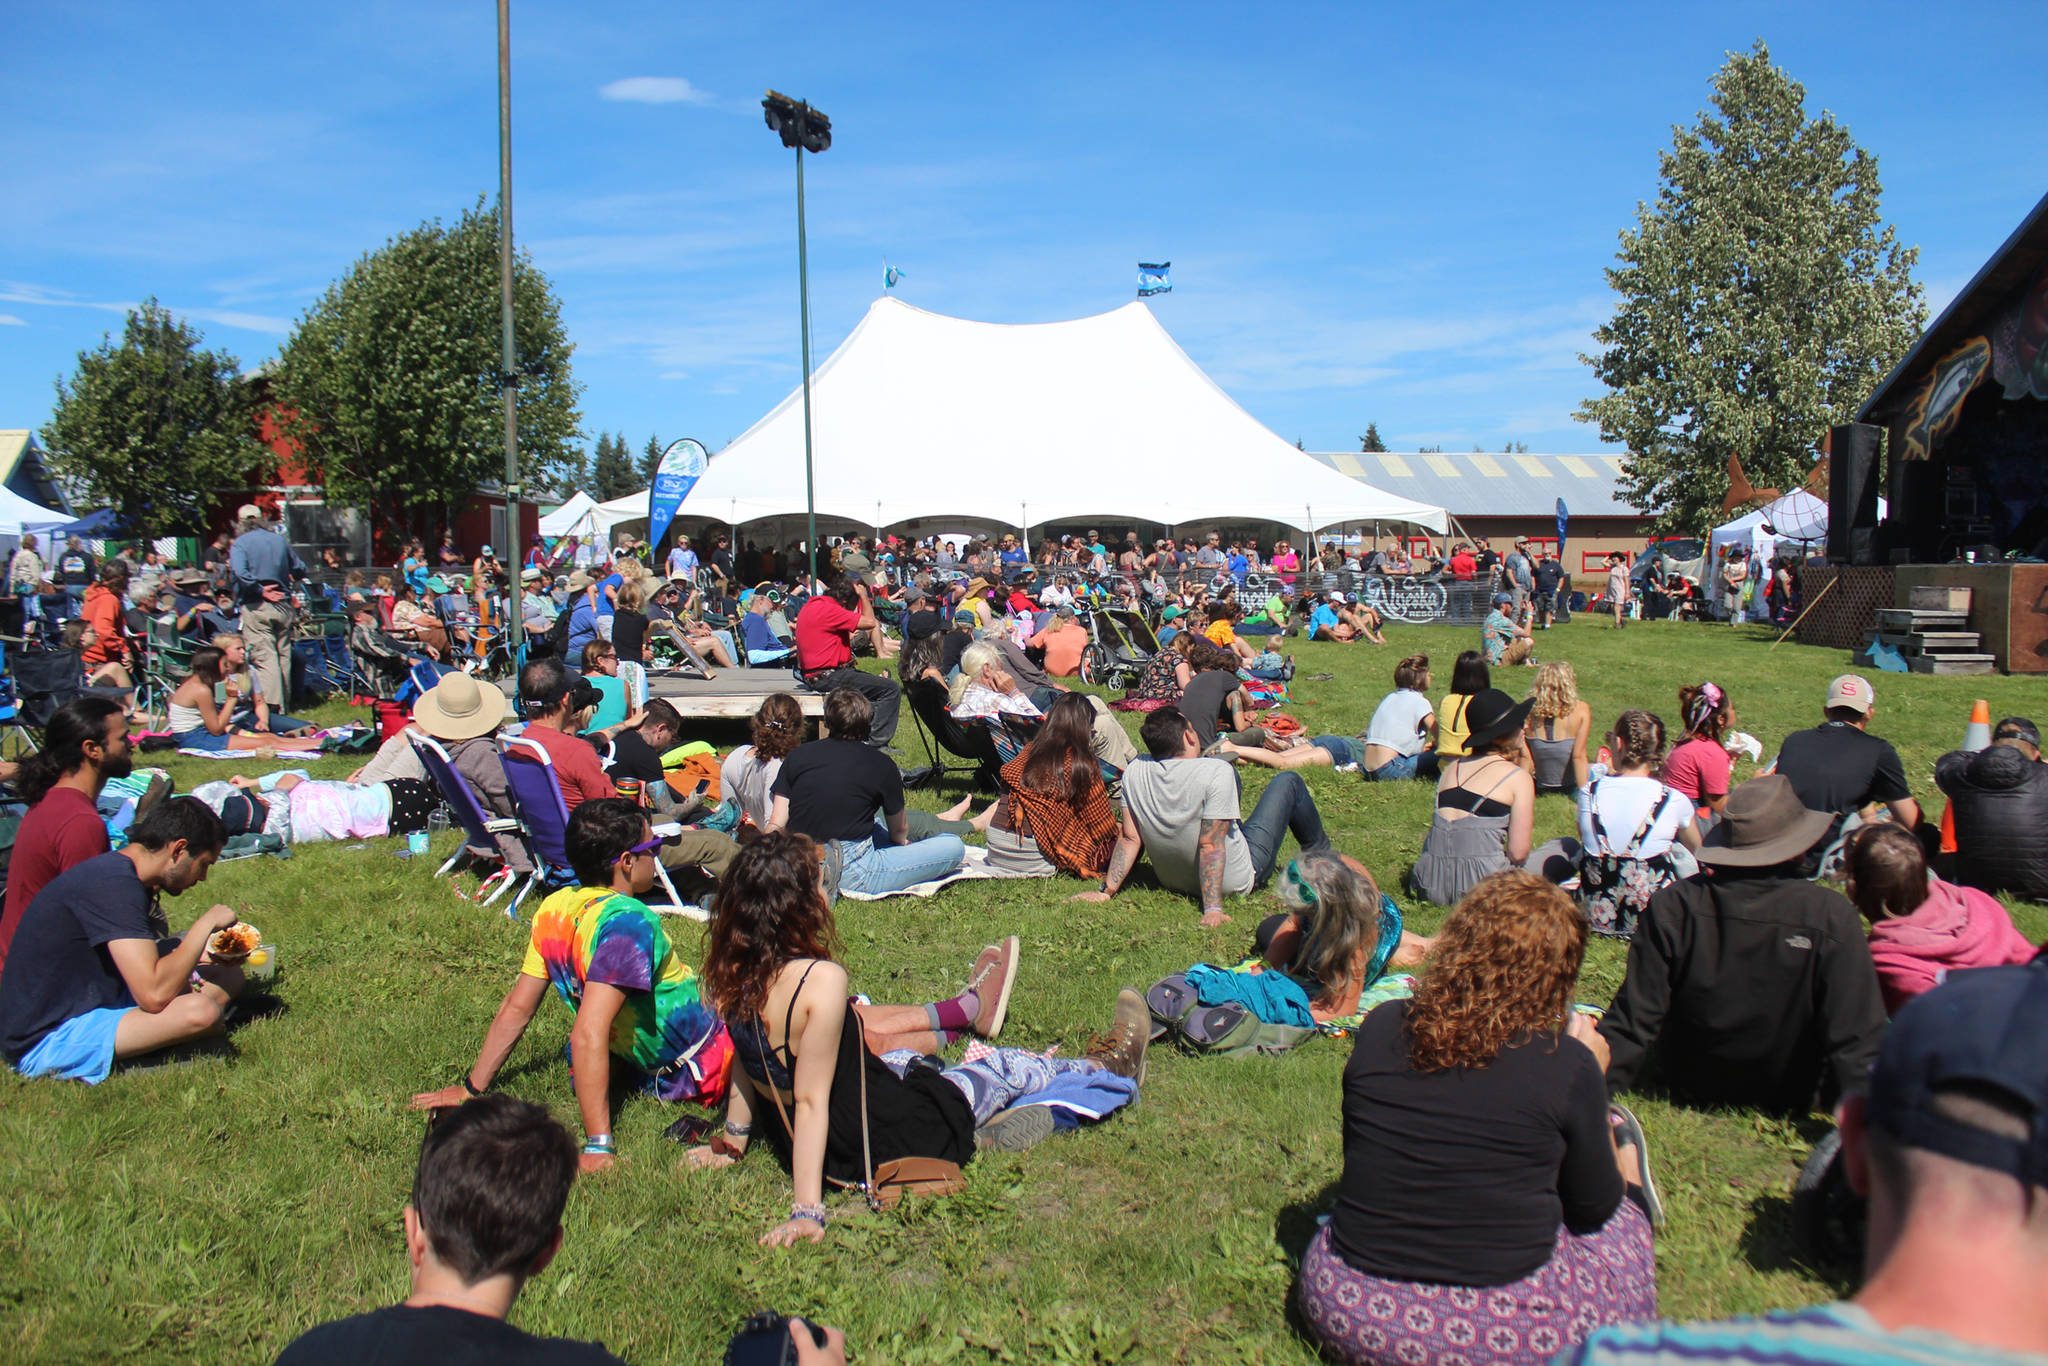 Spectators relax while listening to a musician at the Ocean Stage at last year’s Salmonfest on Friday, Aug. 2, 2019 in Ninilchik, Alaska. (Photo by Megan Pacer/Homer News)